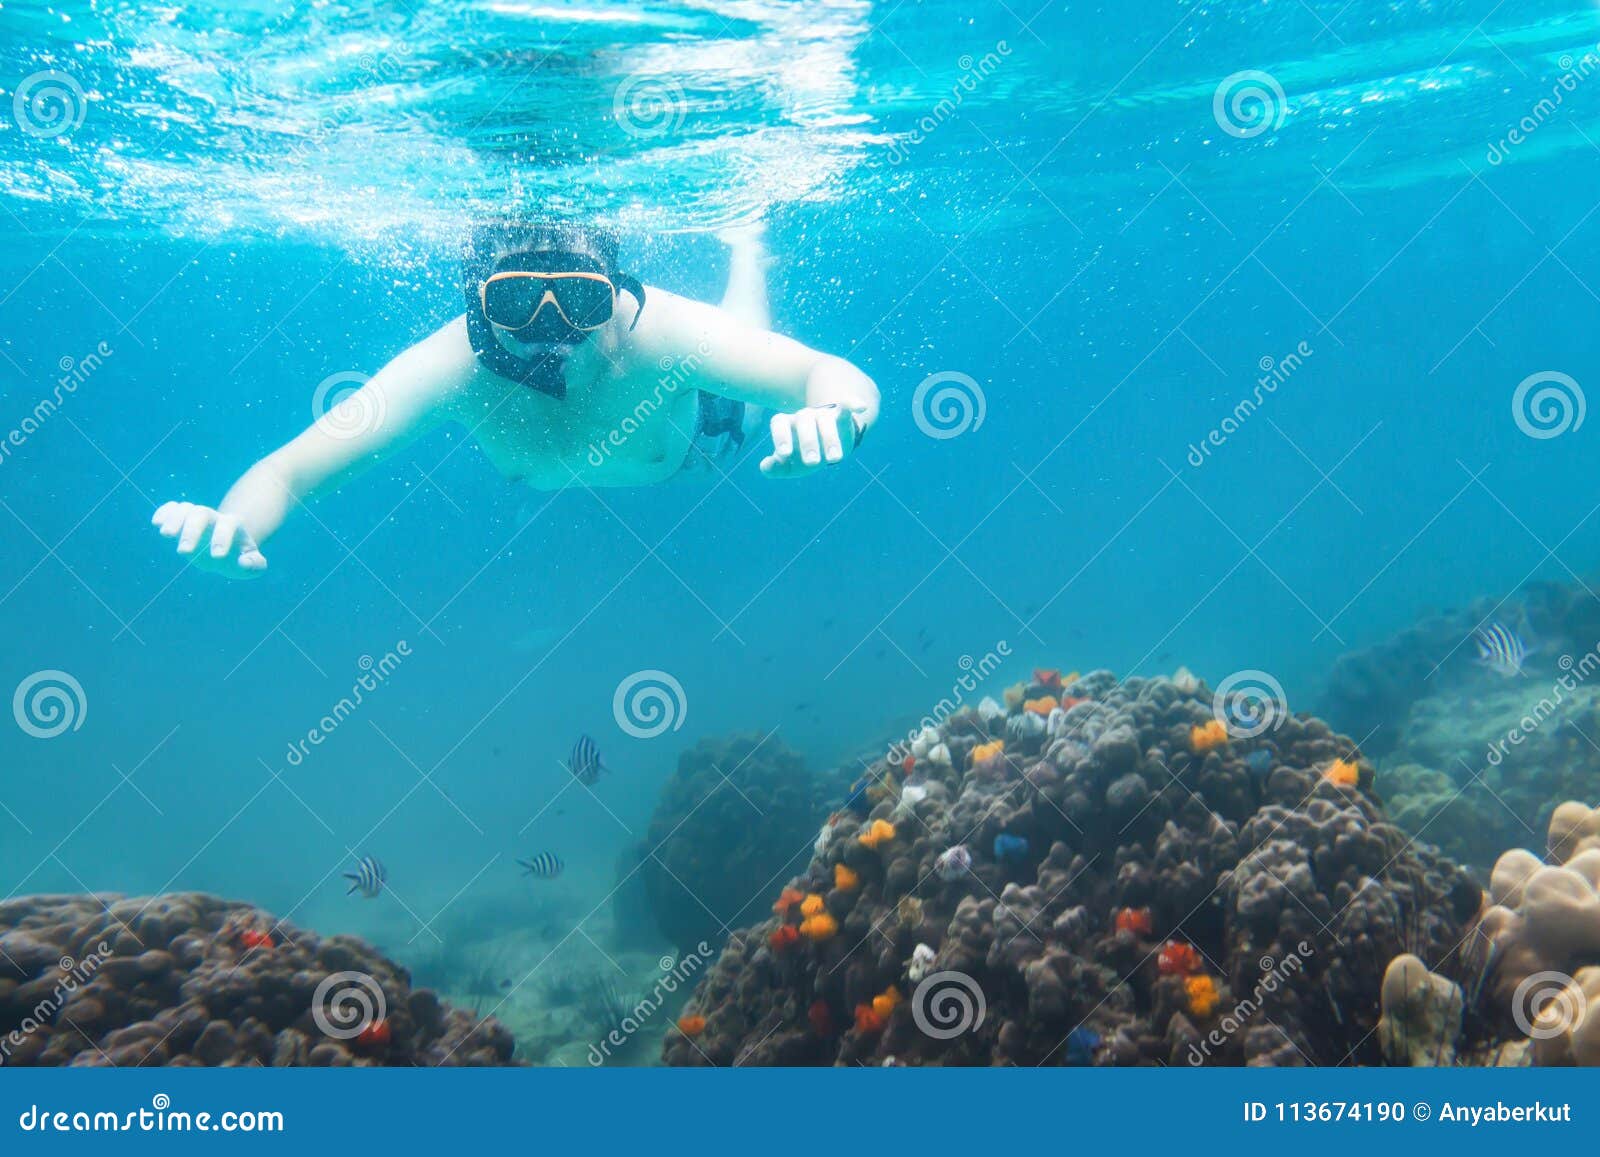 snorkeling underwater, active travels, snorkeler watching corals, swimming and diving